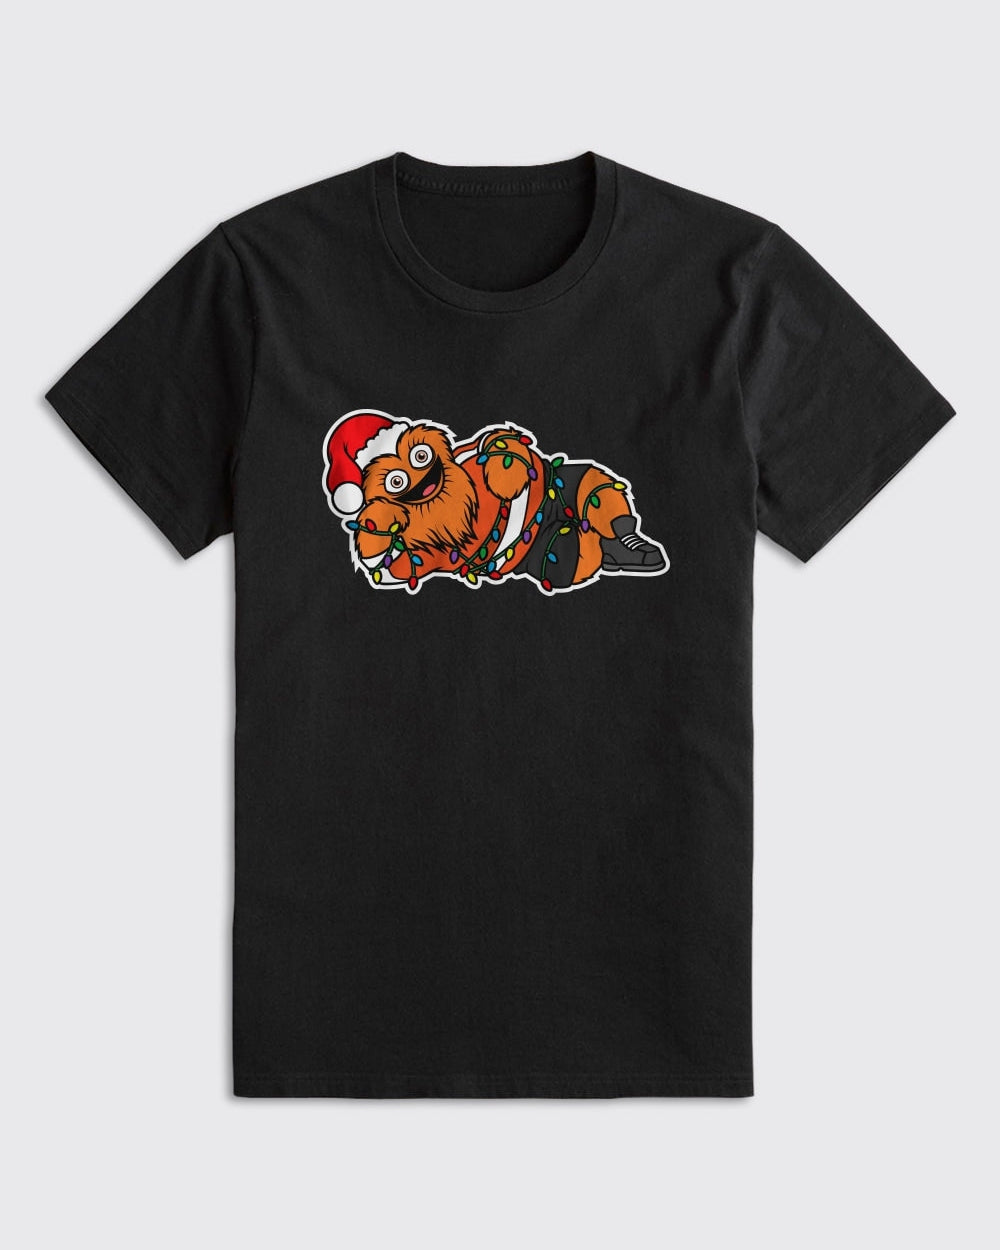 Gritty Christmas Shirt - Flyers, T-Shirts - Philly Sports Shirts